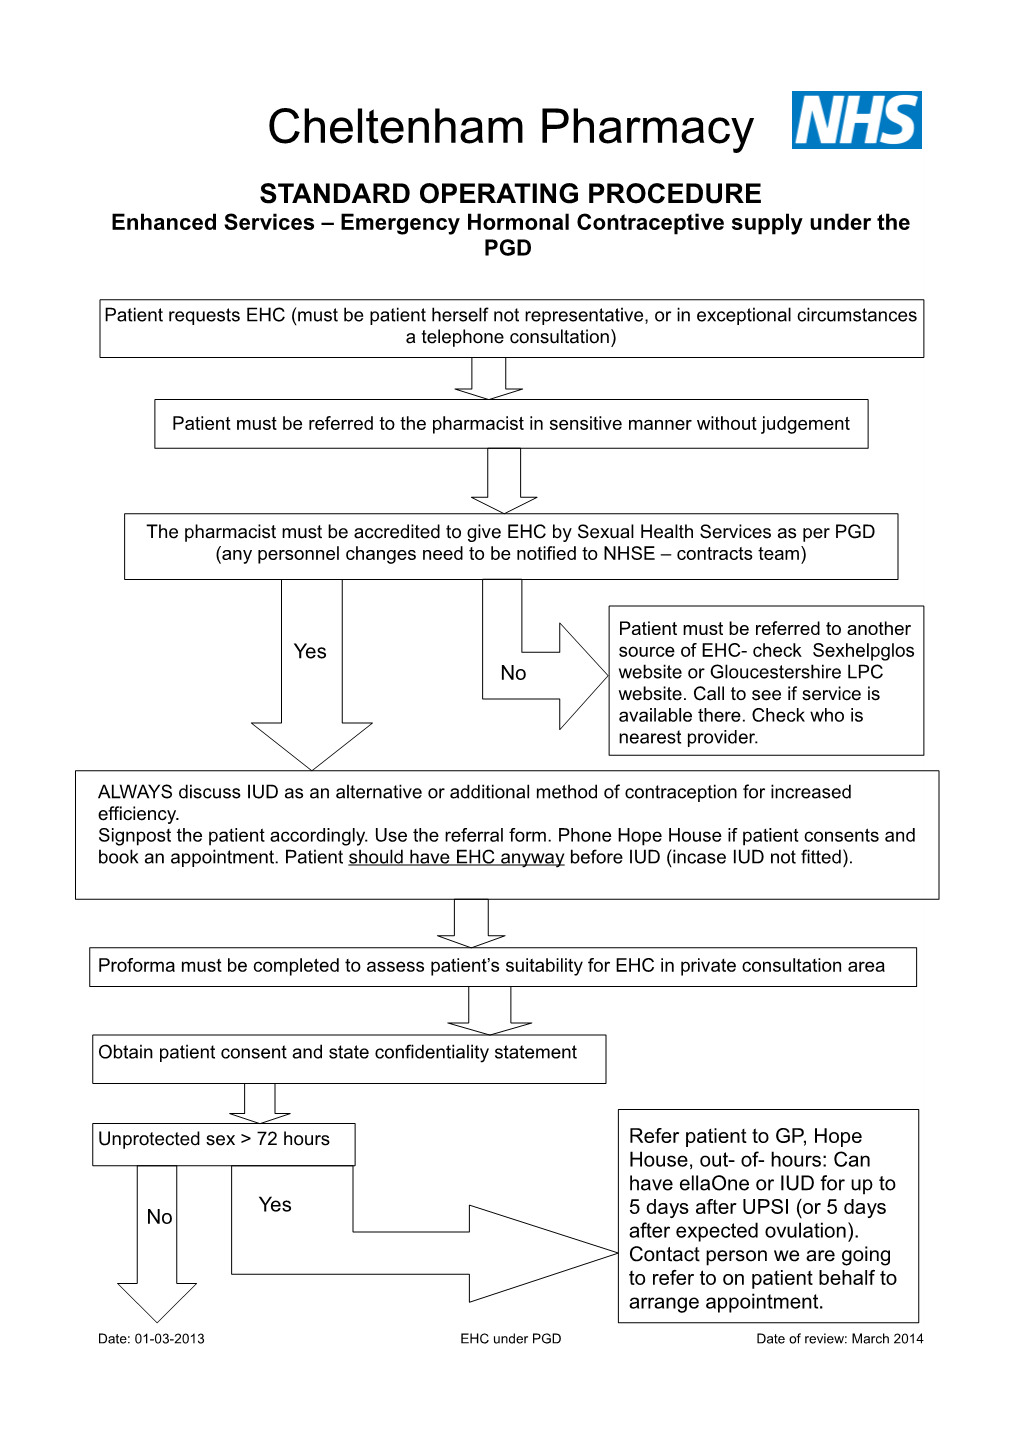 Enhanced Services Emergency Hormonal Contraceptive Supply Under the PGD